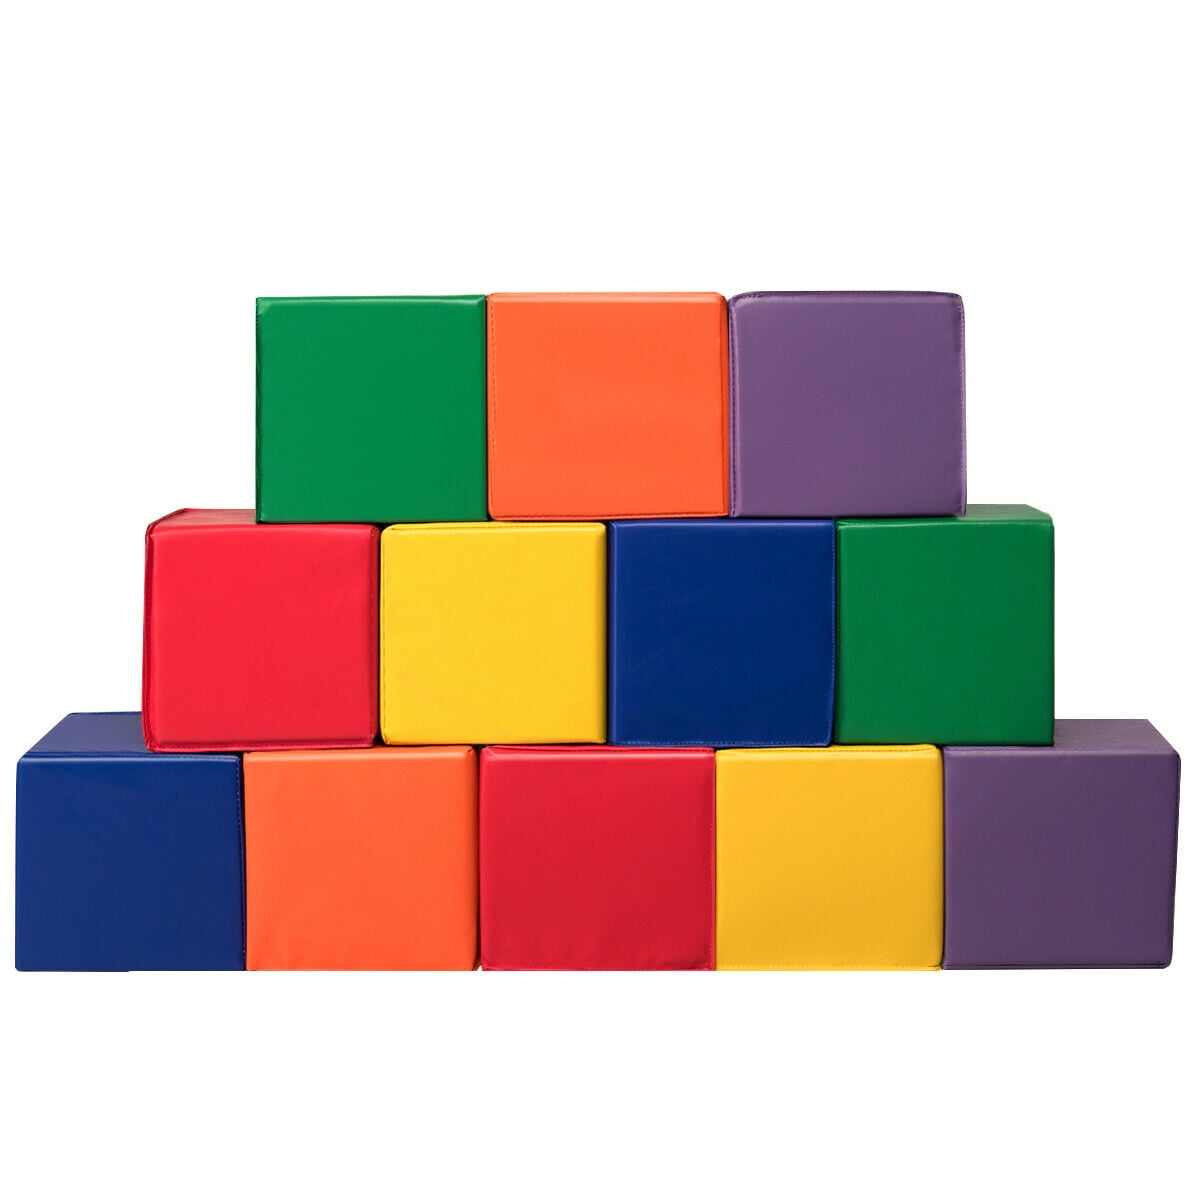 large soft building blocks for toddlers